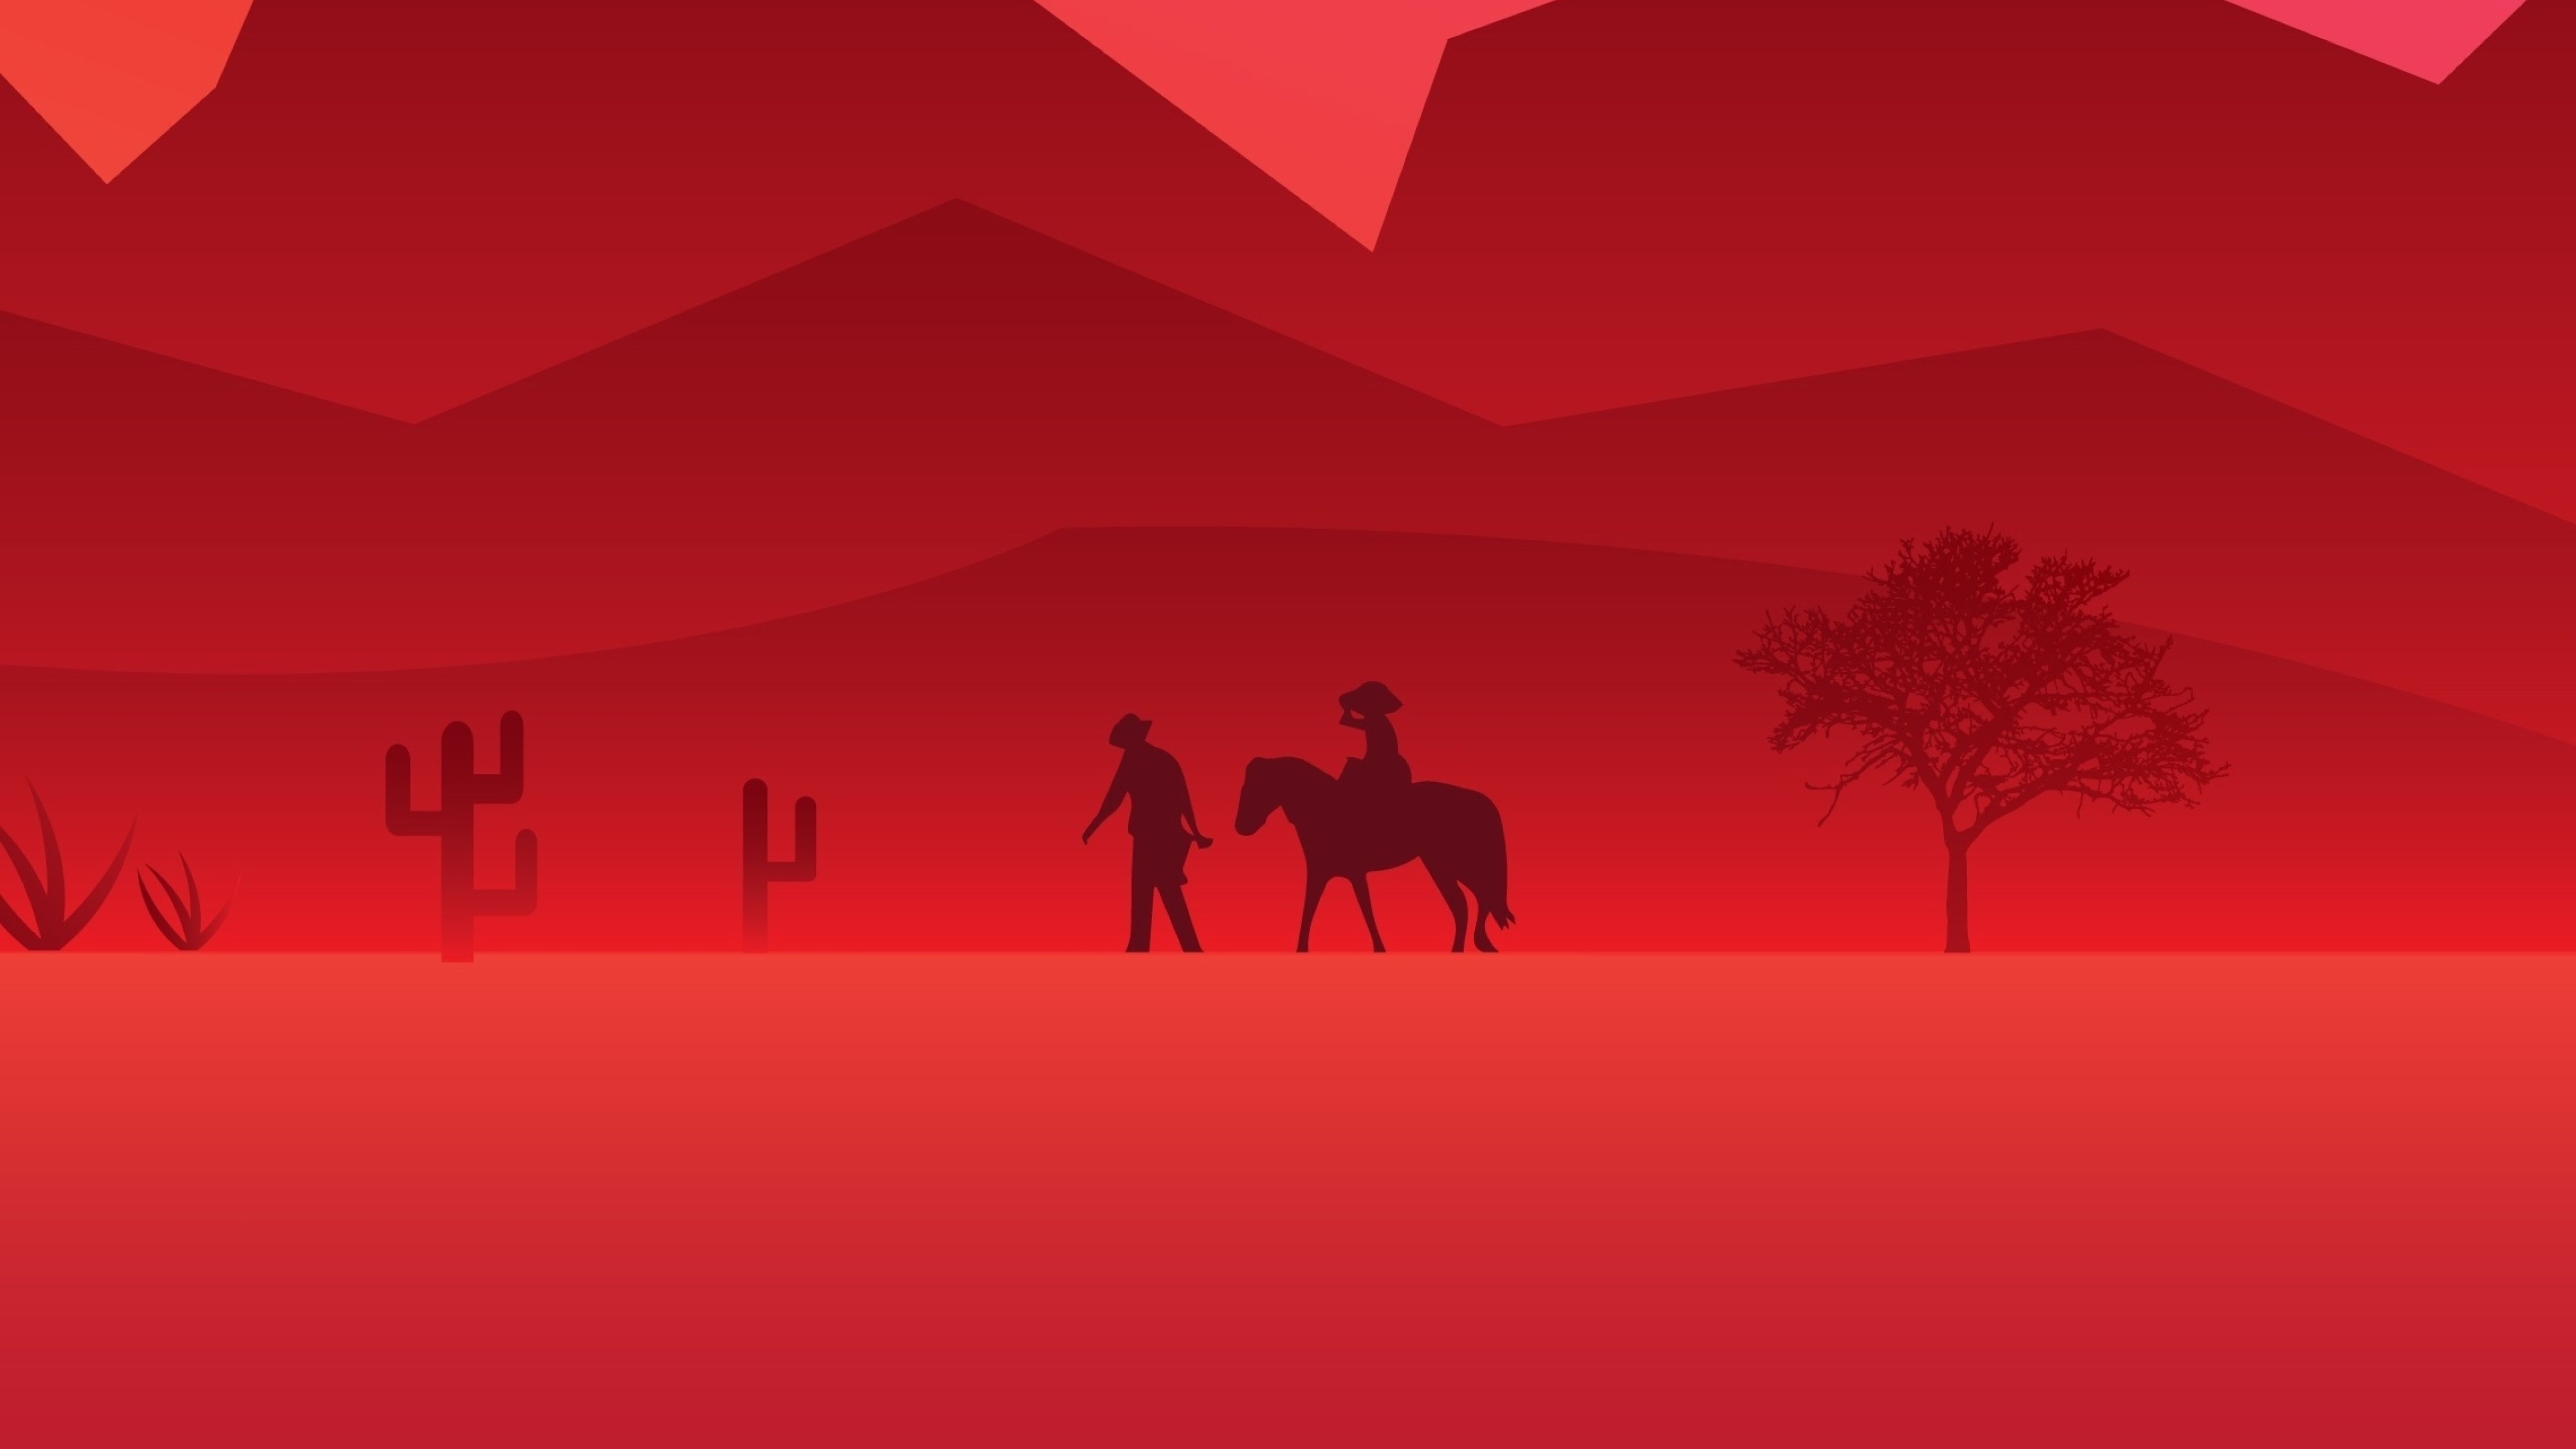 Red Dead Redemption 2 Minimal Game 19 5K Wallpaper, HD Games 4K Wallpaper, Image, Photo and Background